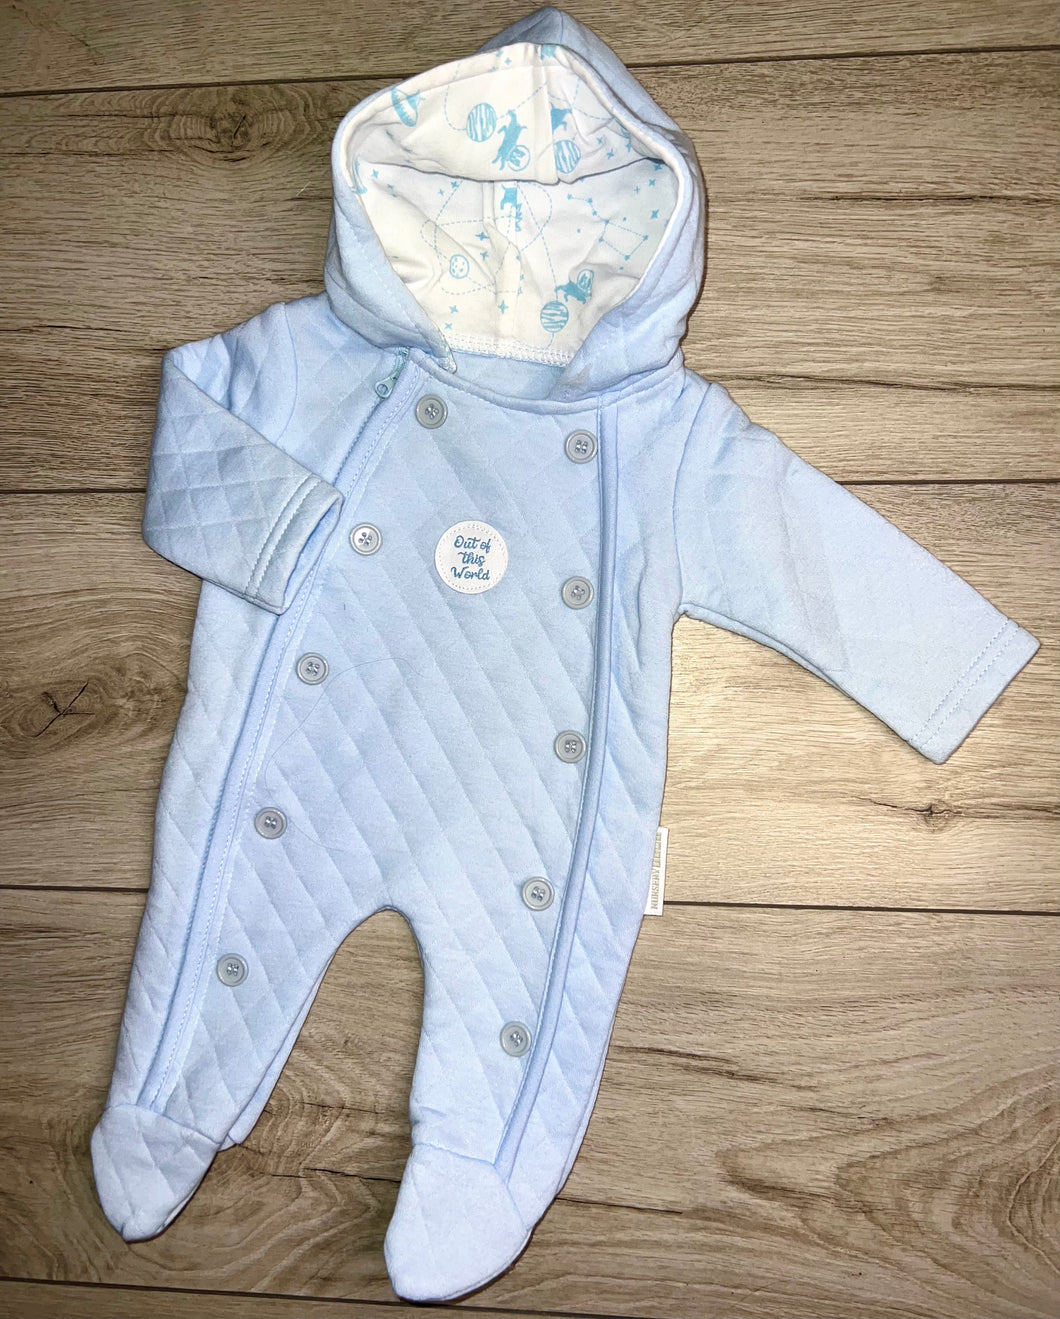 Quilted sleepsuit